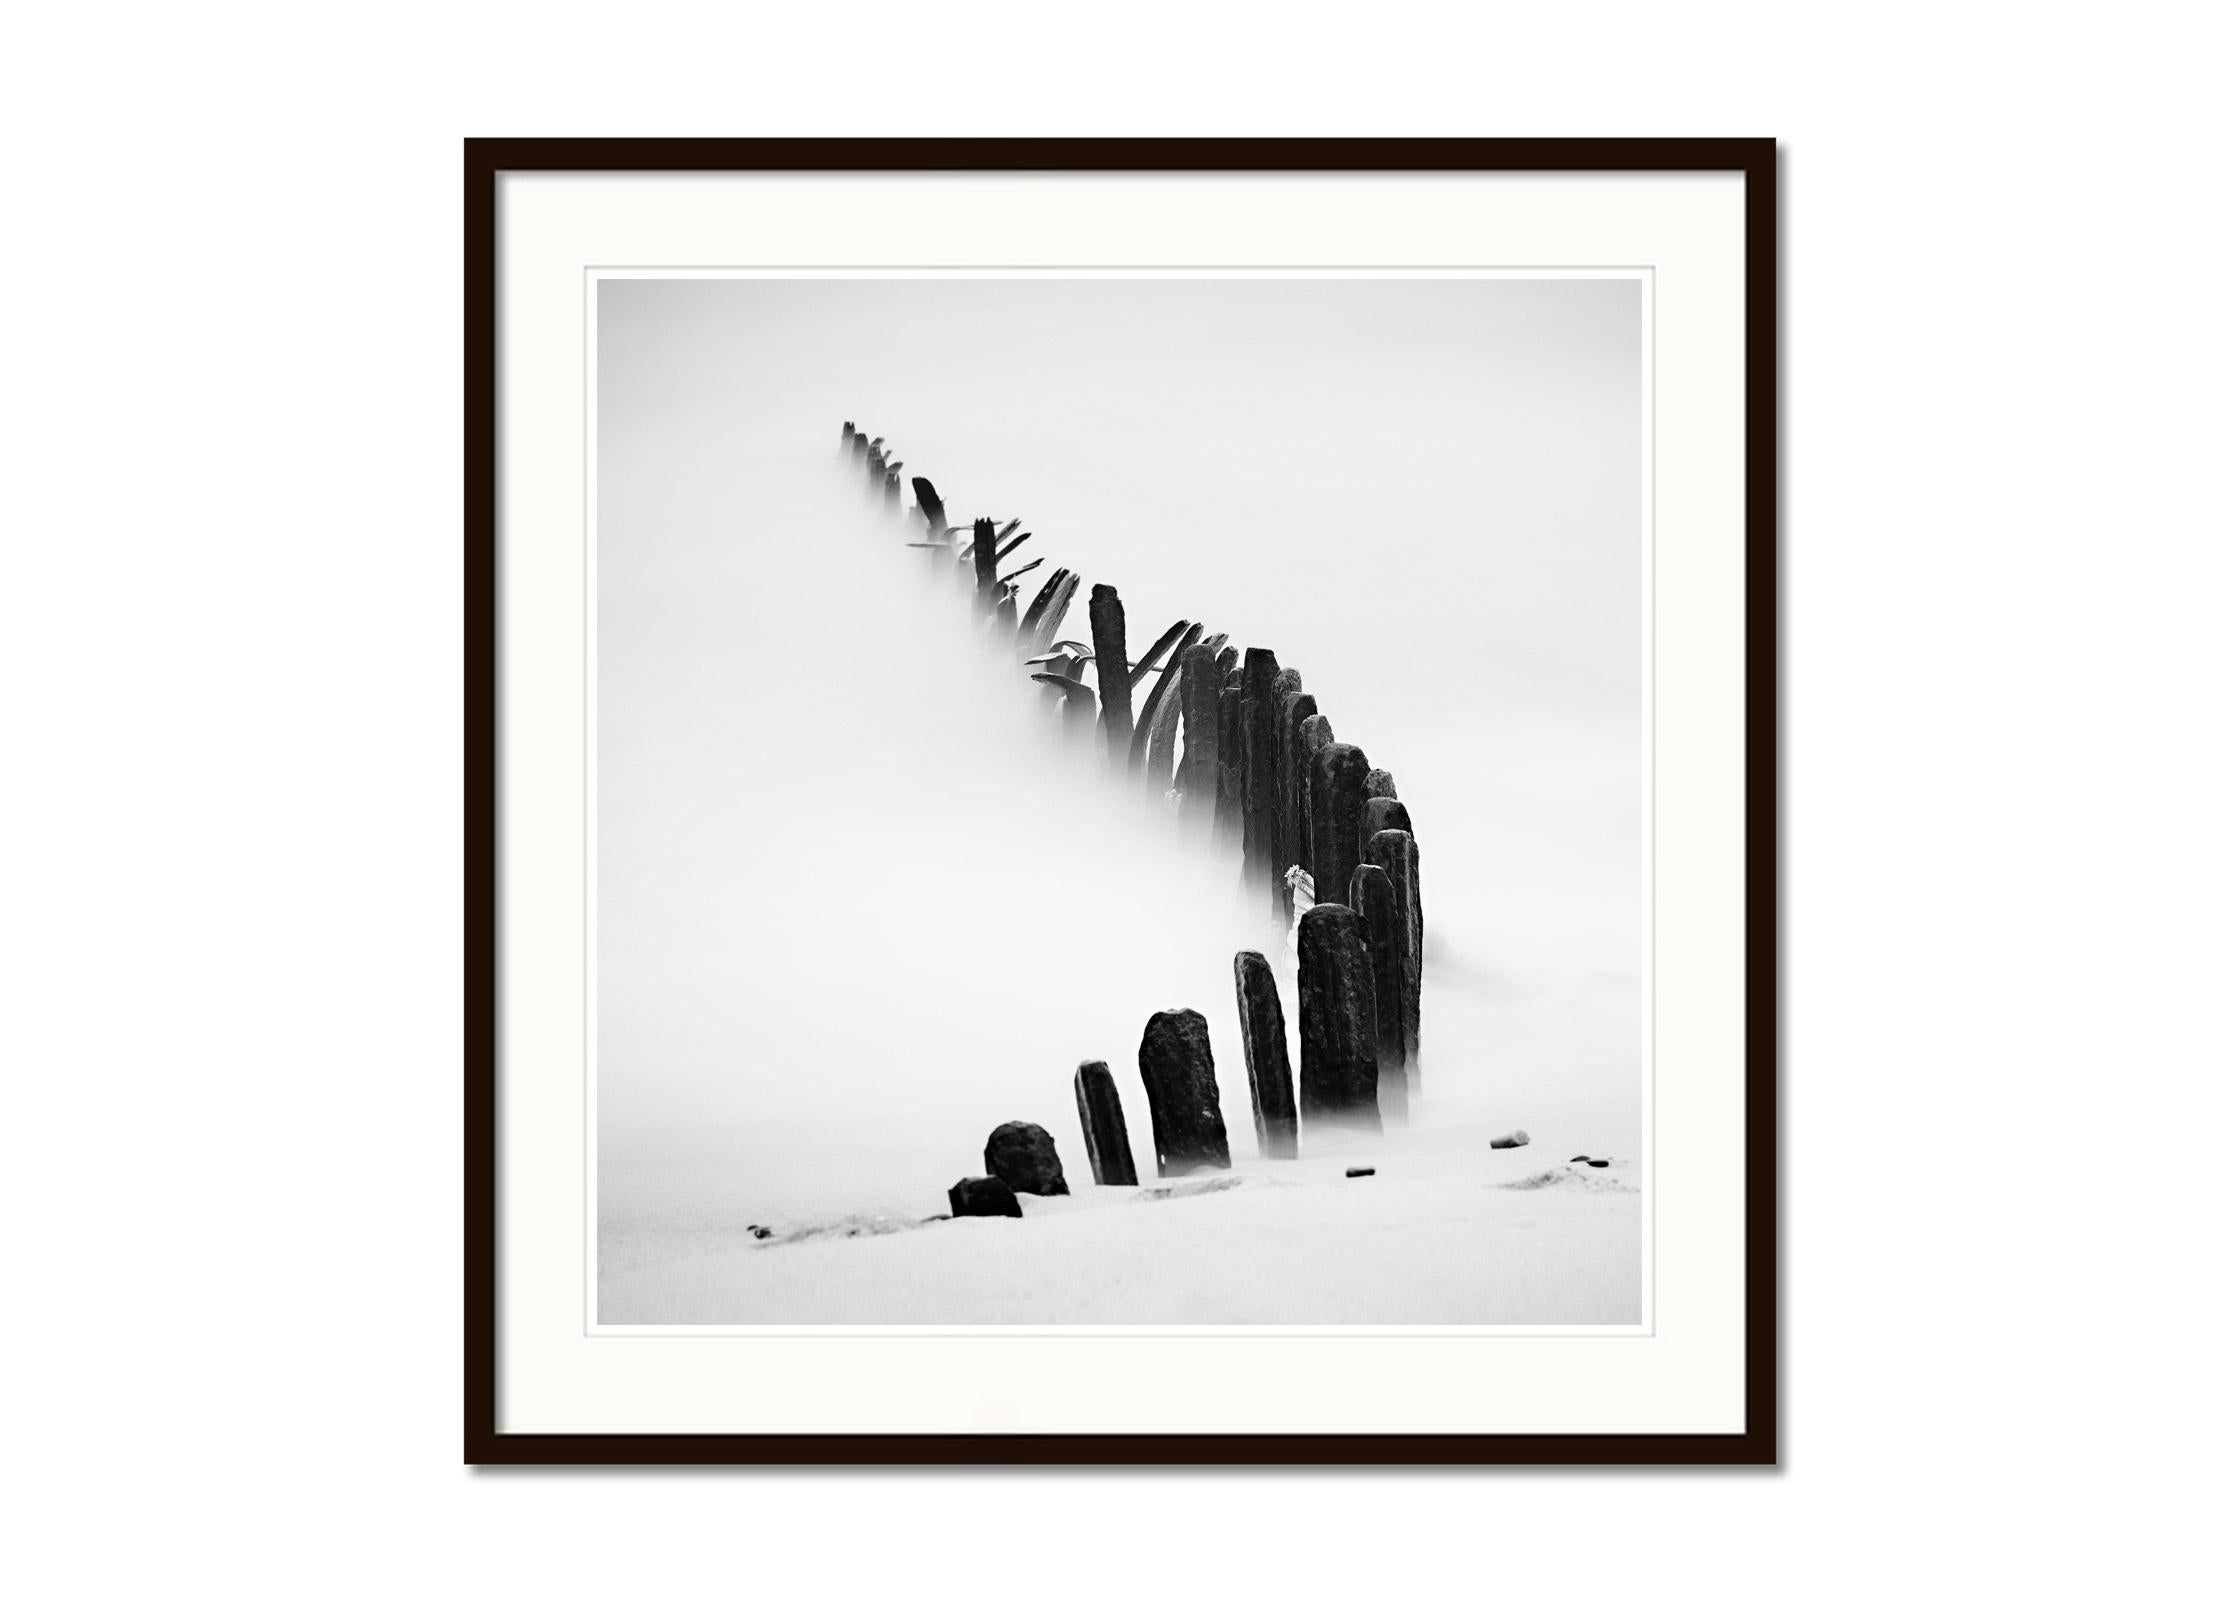 Curved Line, Sylt, Germany, black and white art photography, fine art landscape - Gray Landscape Photograph by Gerald Berghammer